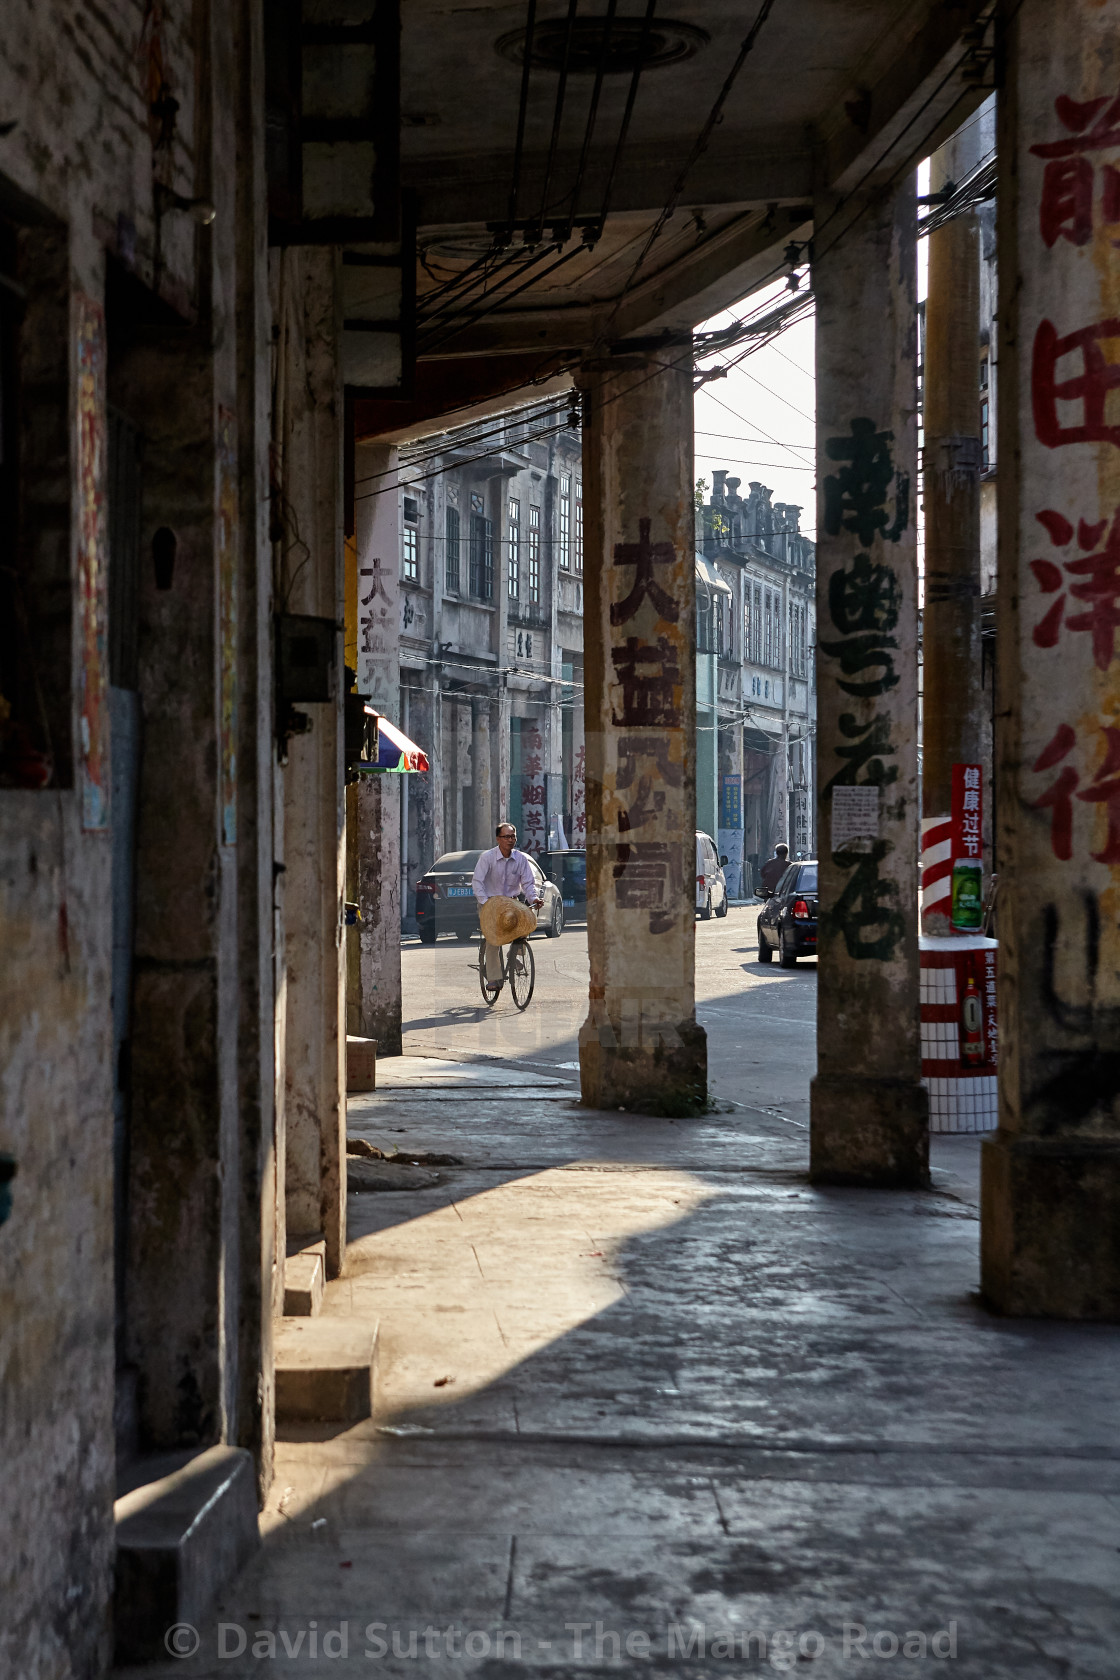 "Zhonghua E Road, the main road running through Chikan old town boasts a large..." stock image